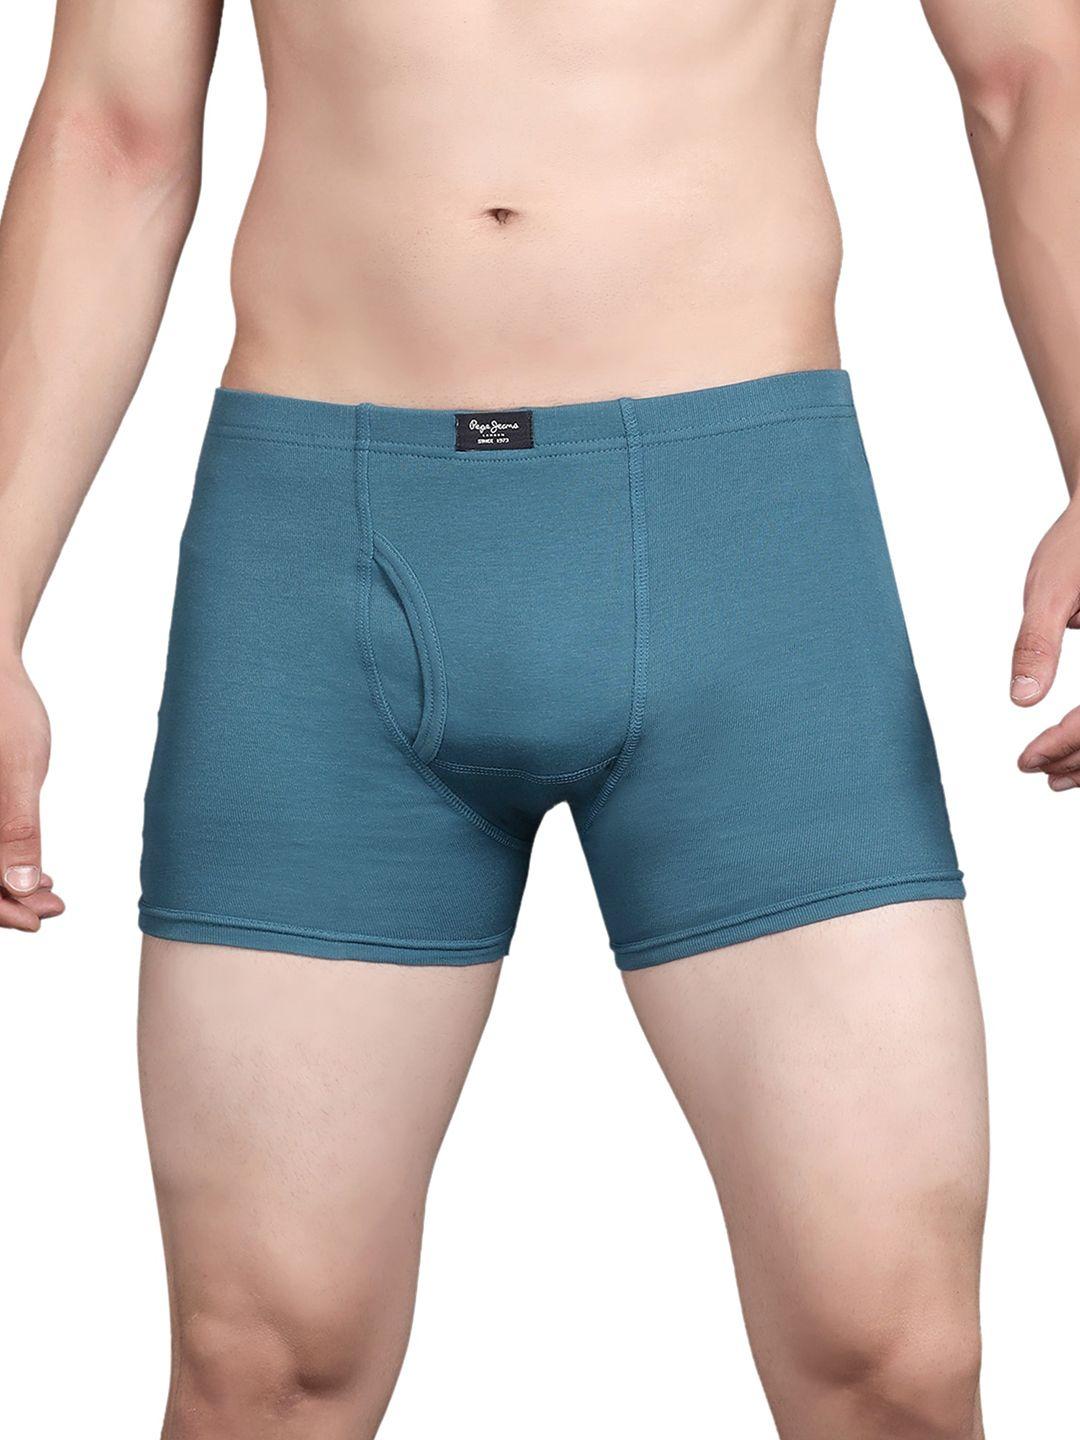 pepe jeans men pack of 2 teal blue solid cotton trunk clt01-02-corsair-s